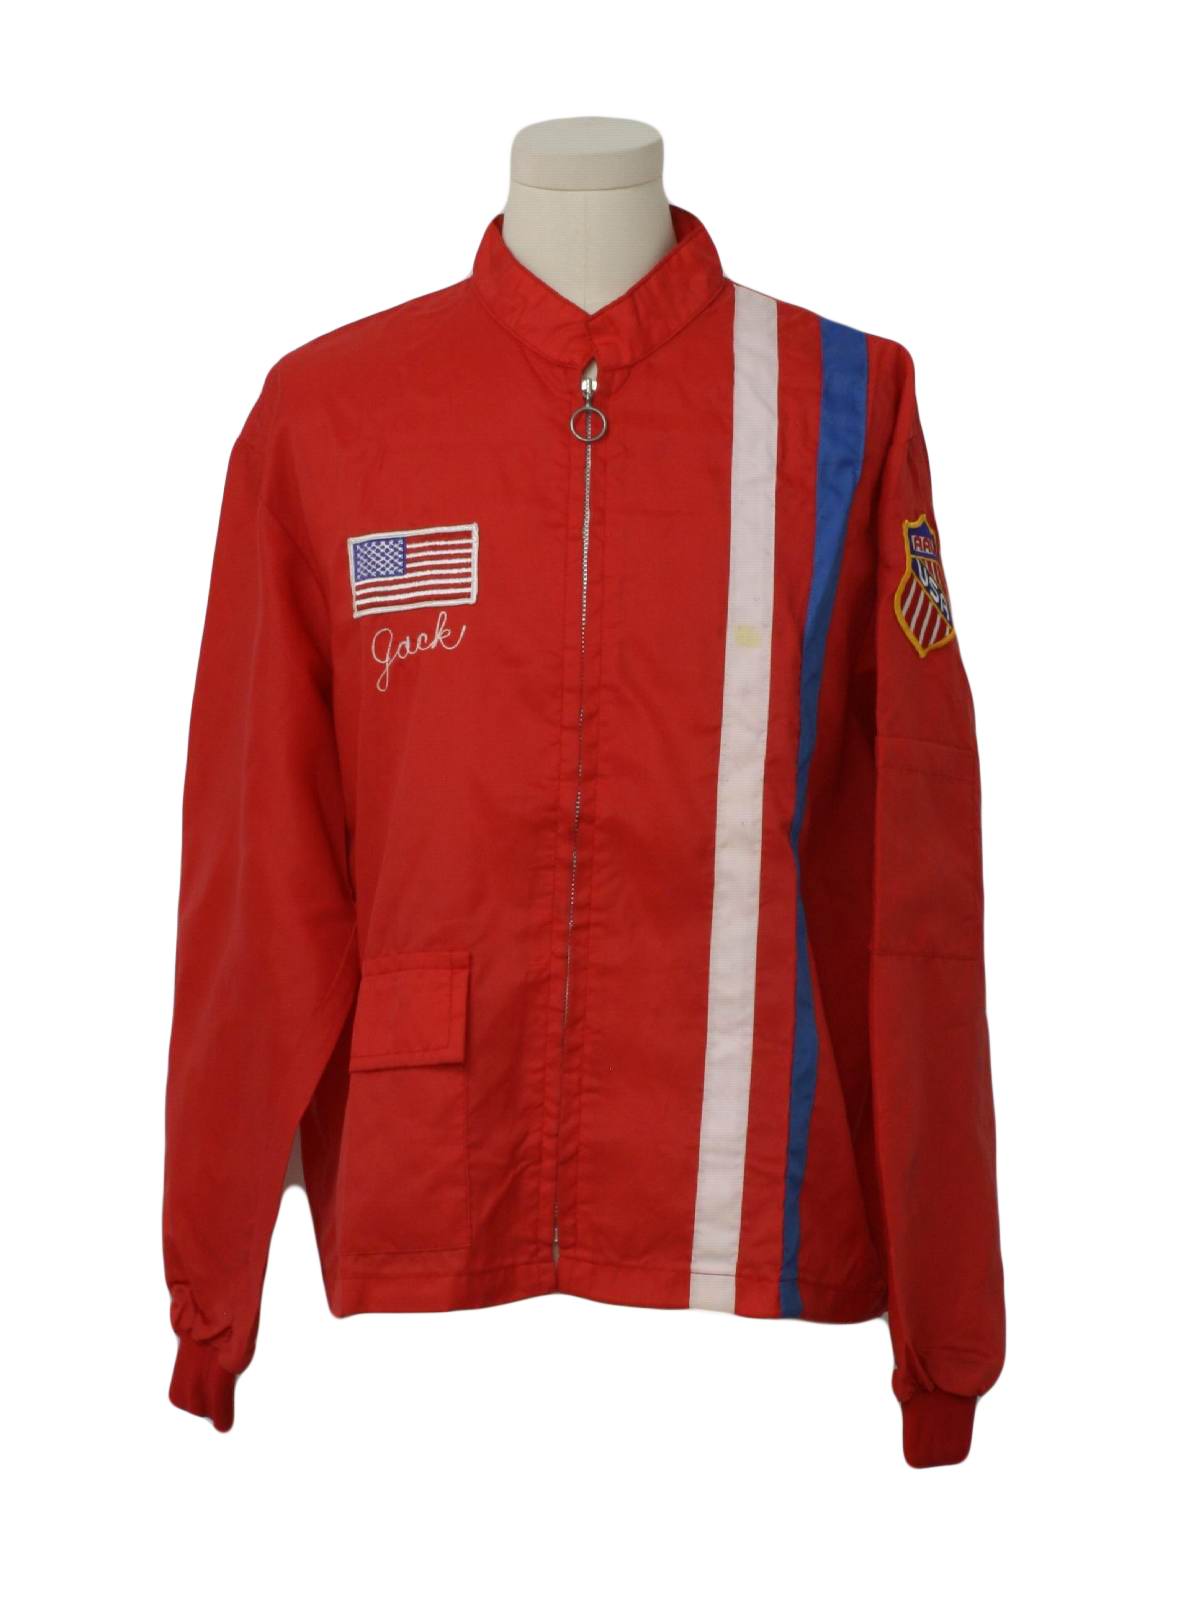 Retro 1960's Jacket (The Great Lakes Jacket) : 60s -The Great Lakes ...